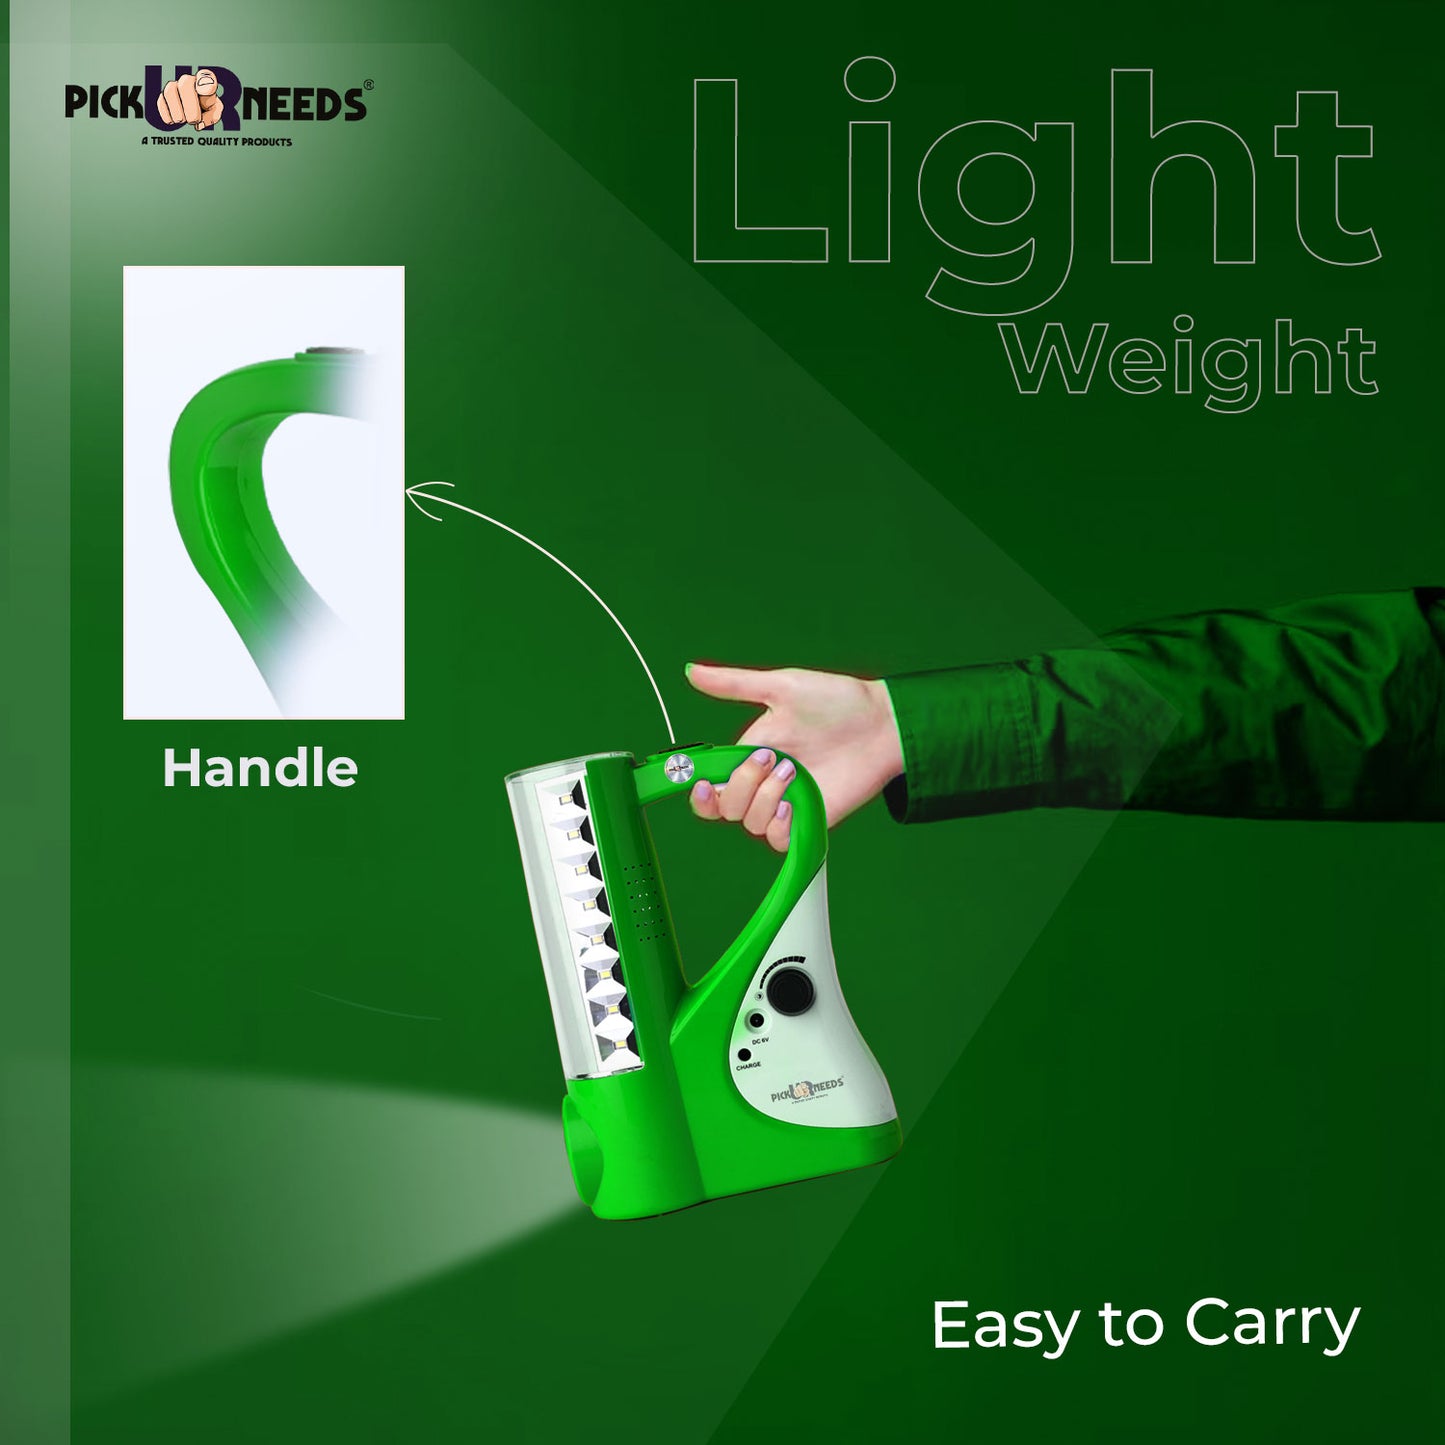 Pick Ur Needs Rechargeable Emergency 2 In 1 Home LED Torch Lantern Lamp Light with 24 SMD Light